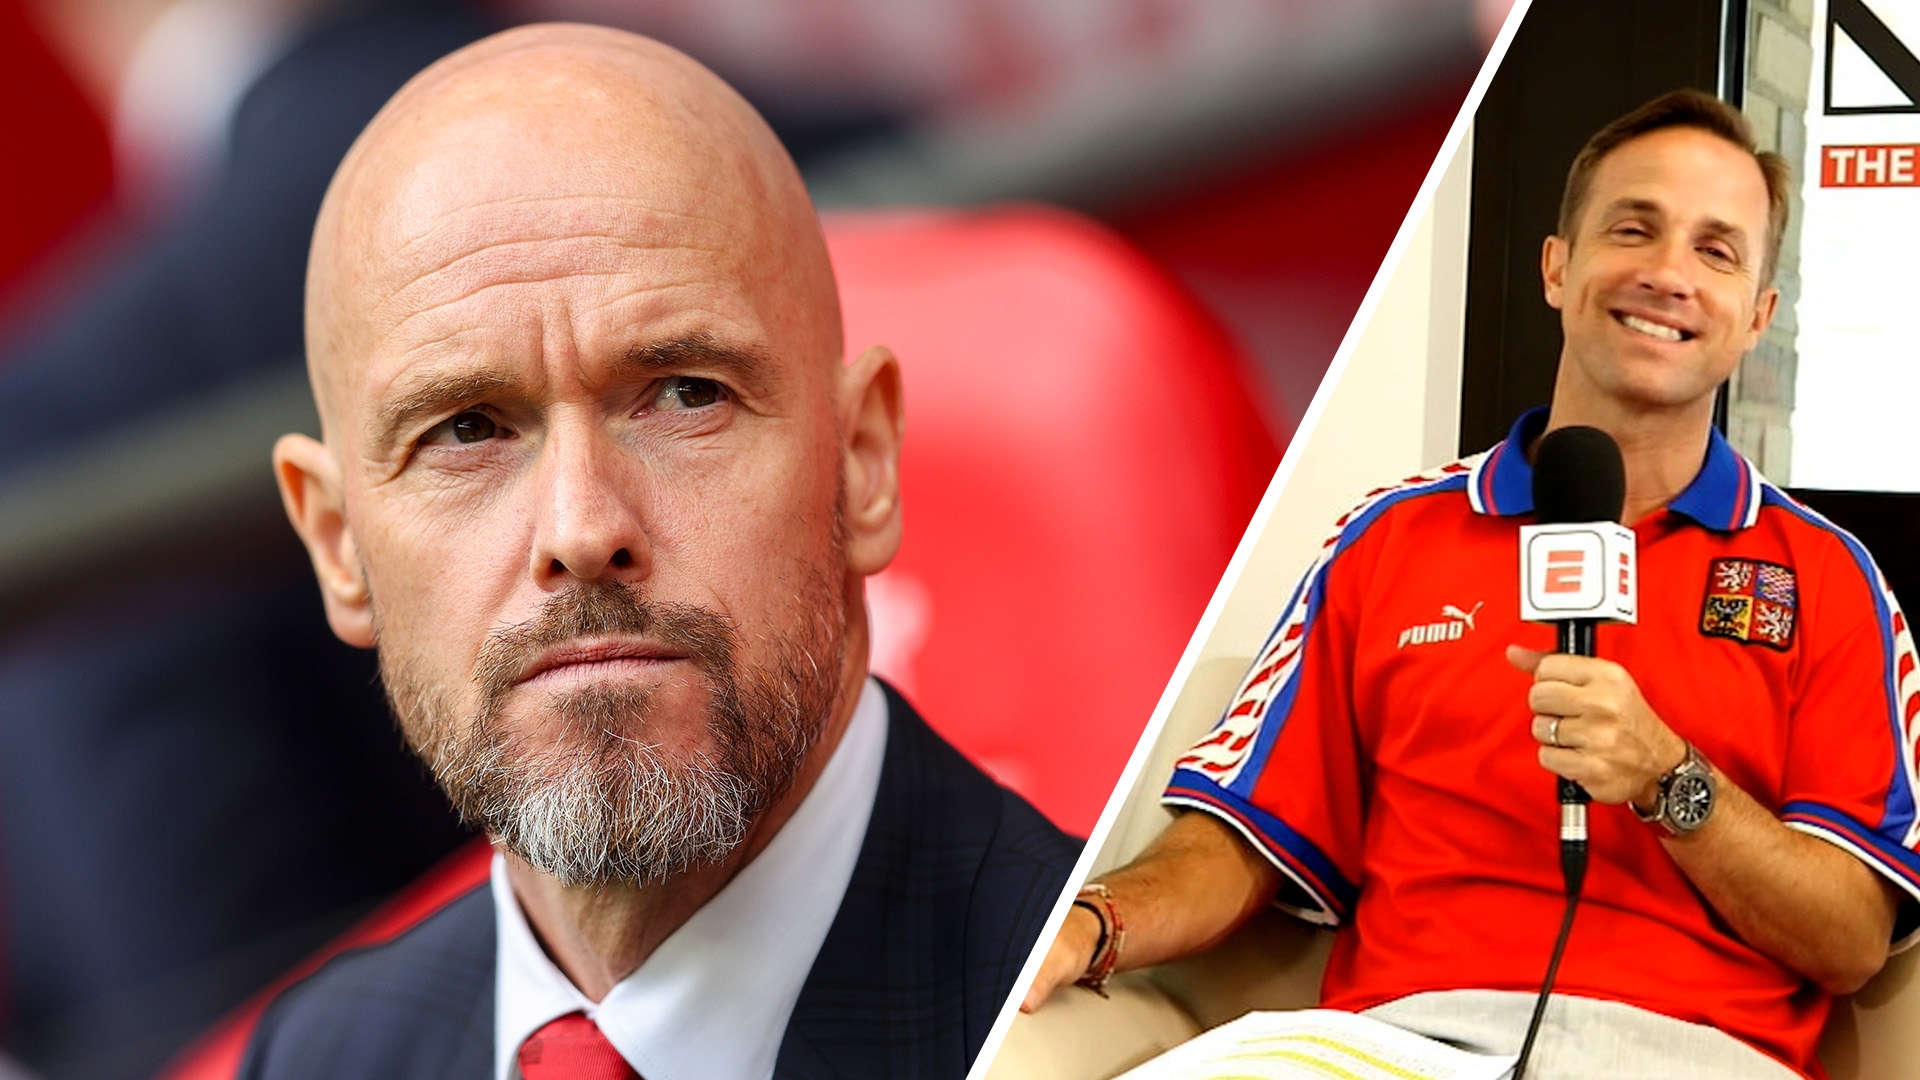 Laurens: INEOS did not tell Ten Hag he's the 'best manager'